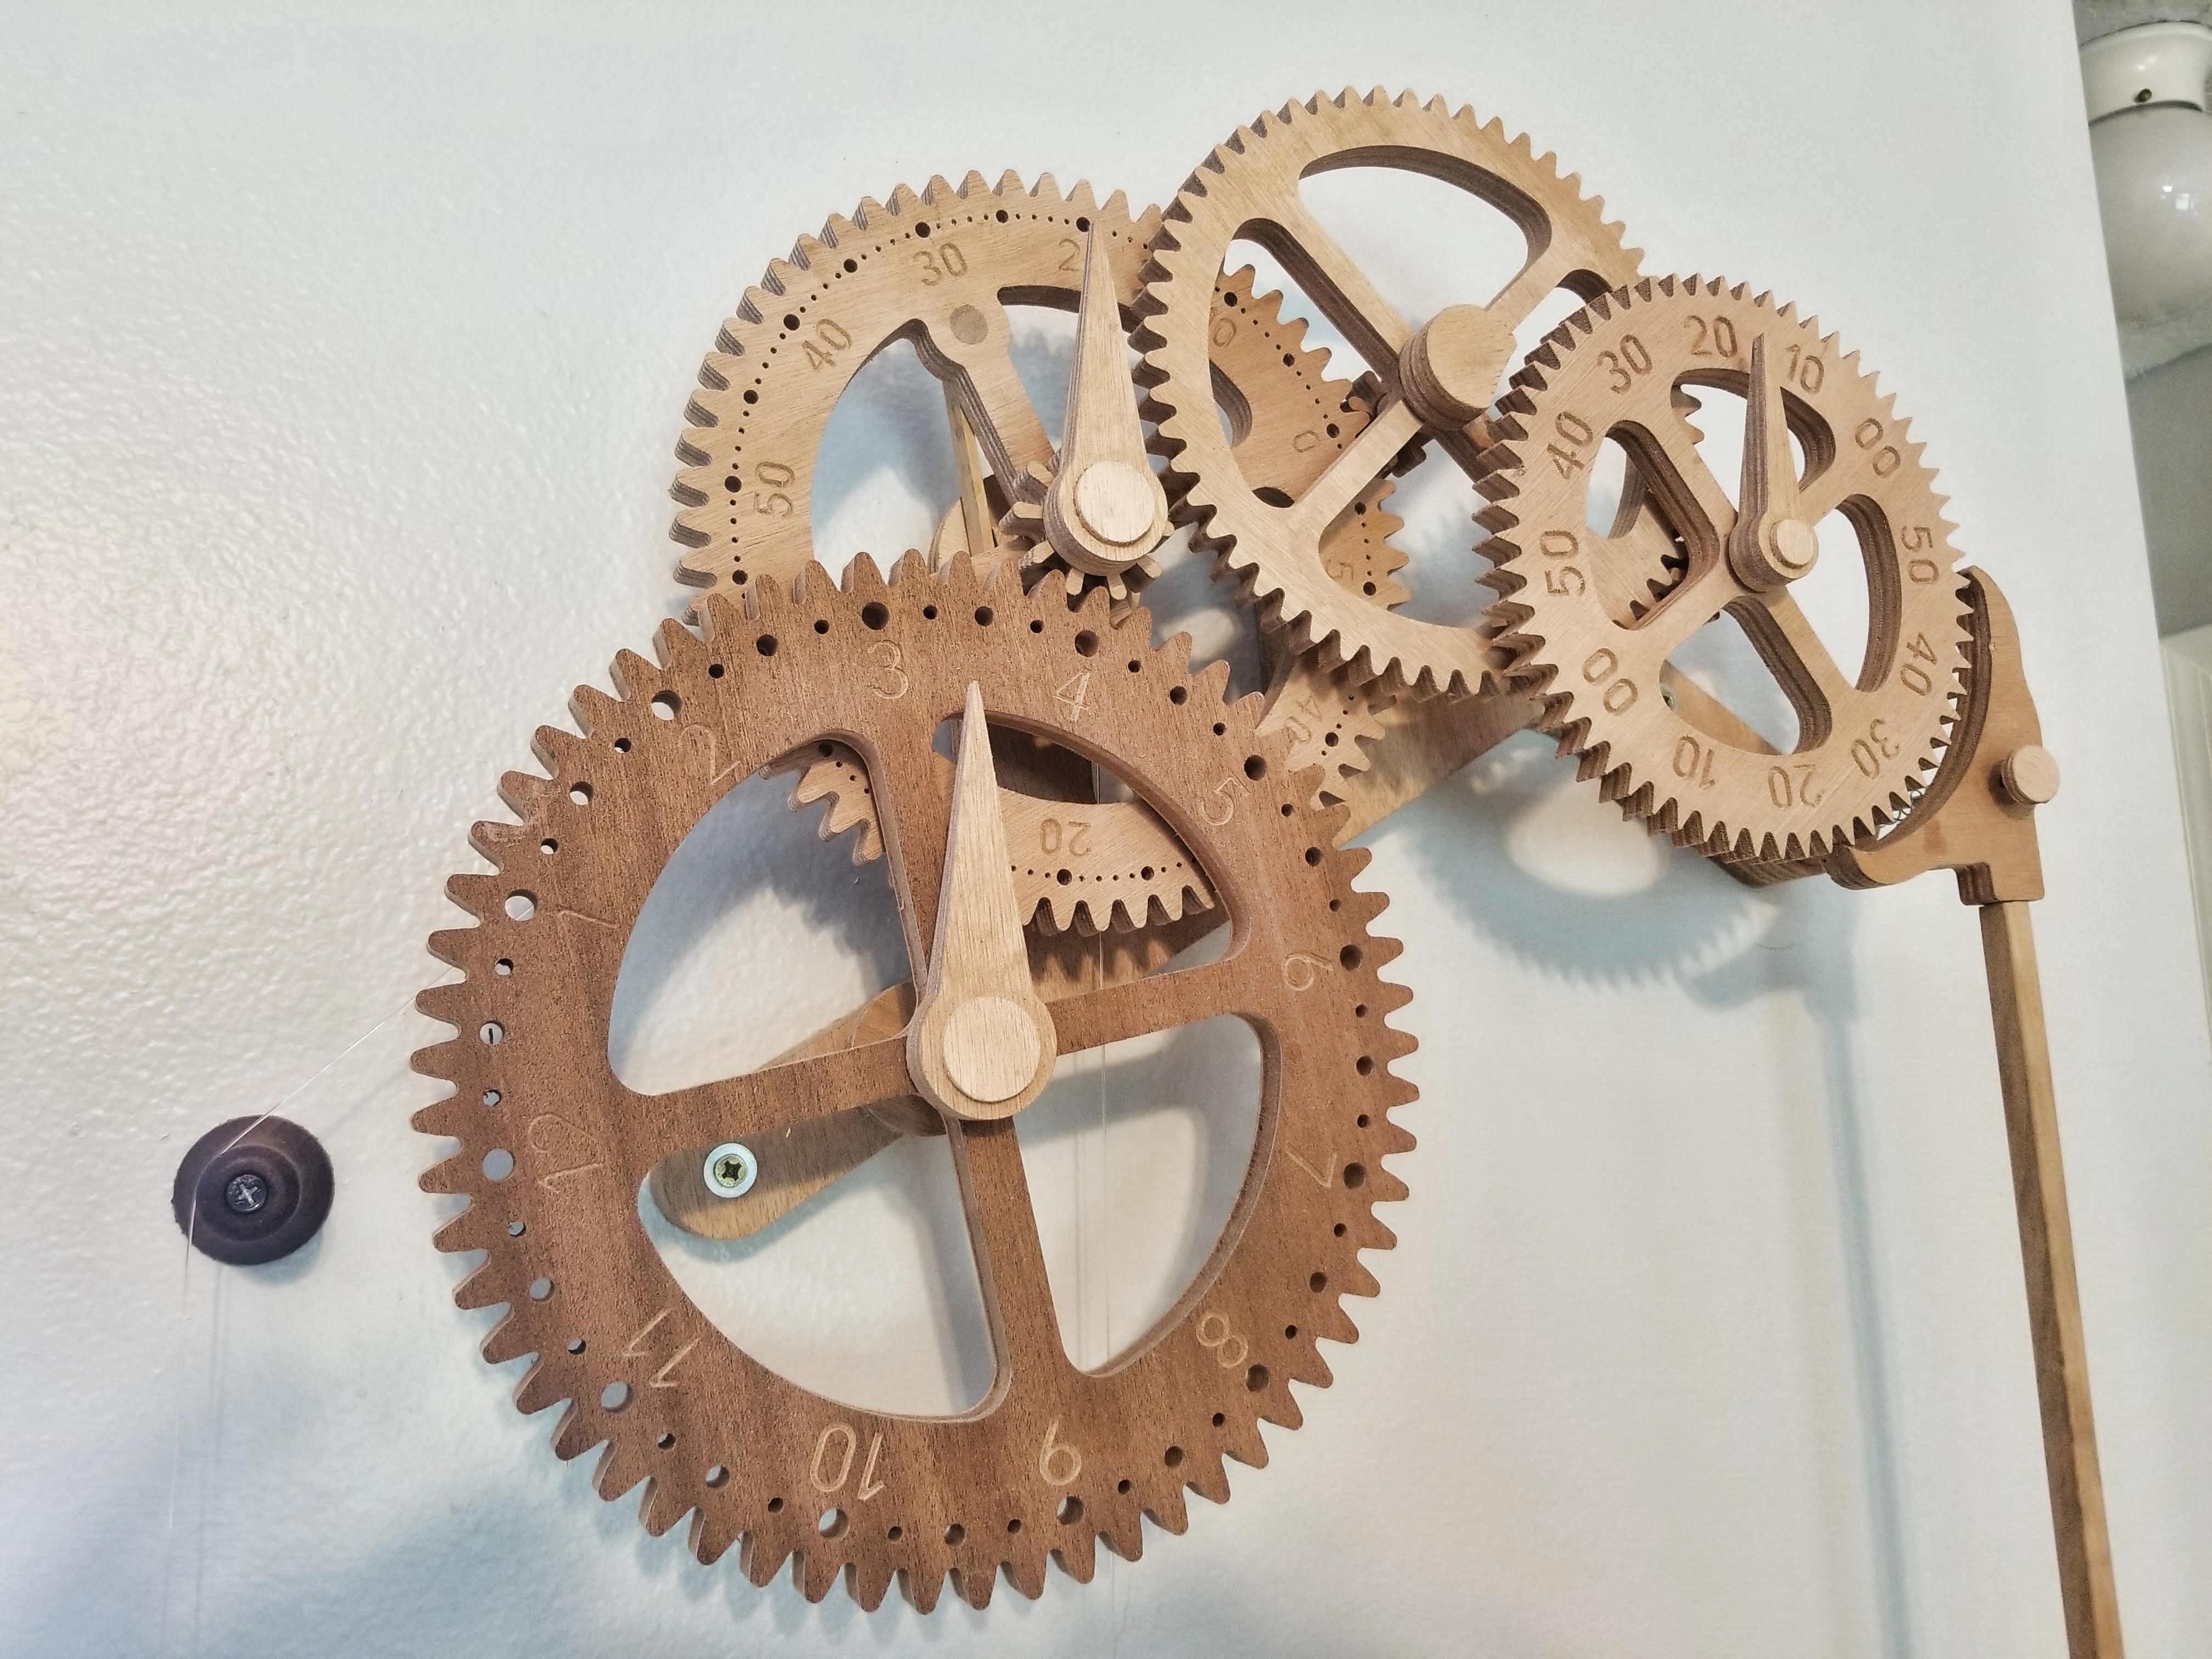 Making a wooden gear clock - Part 2 - Loxaco, Inc - with ...
